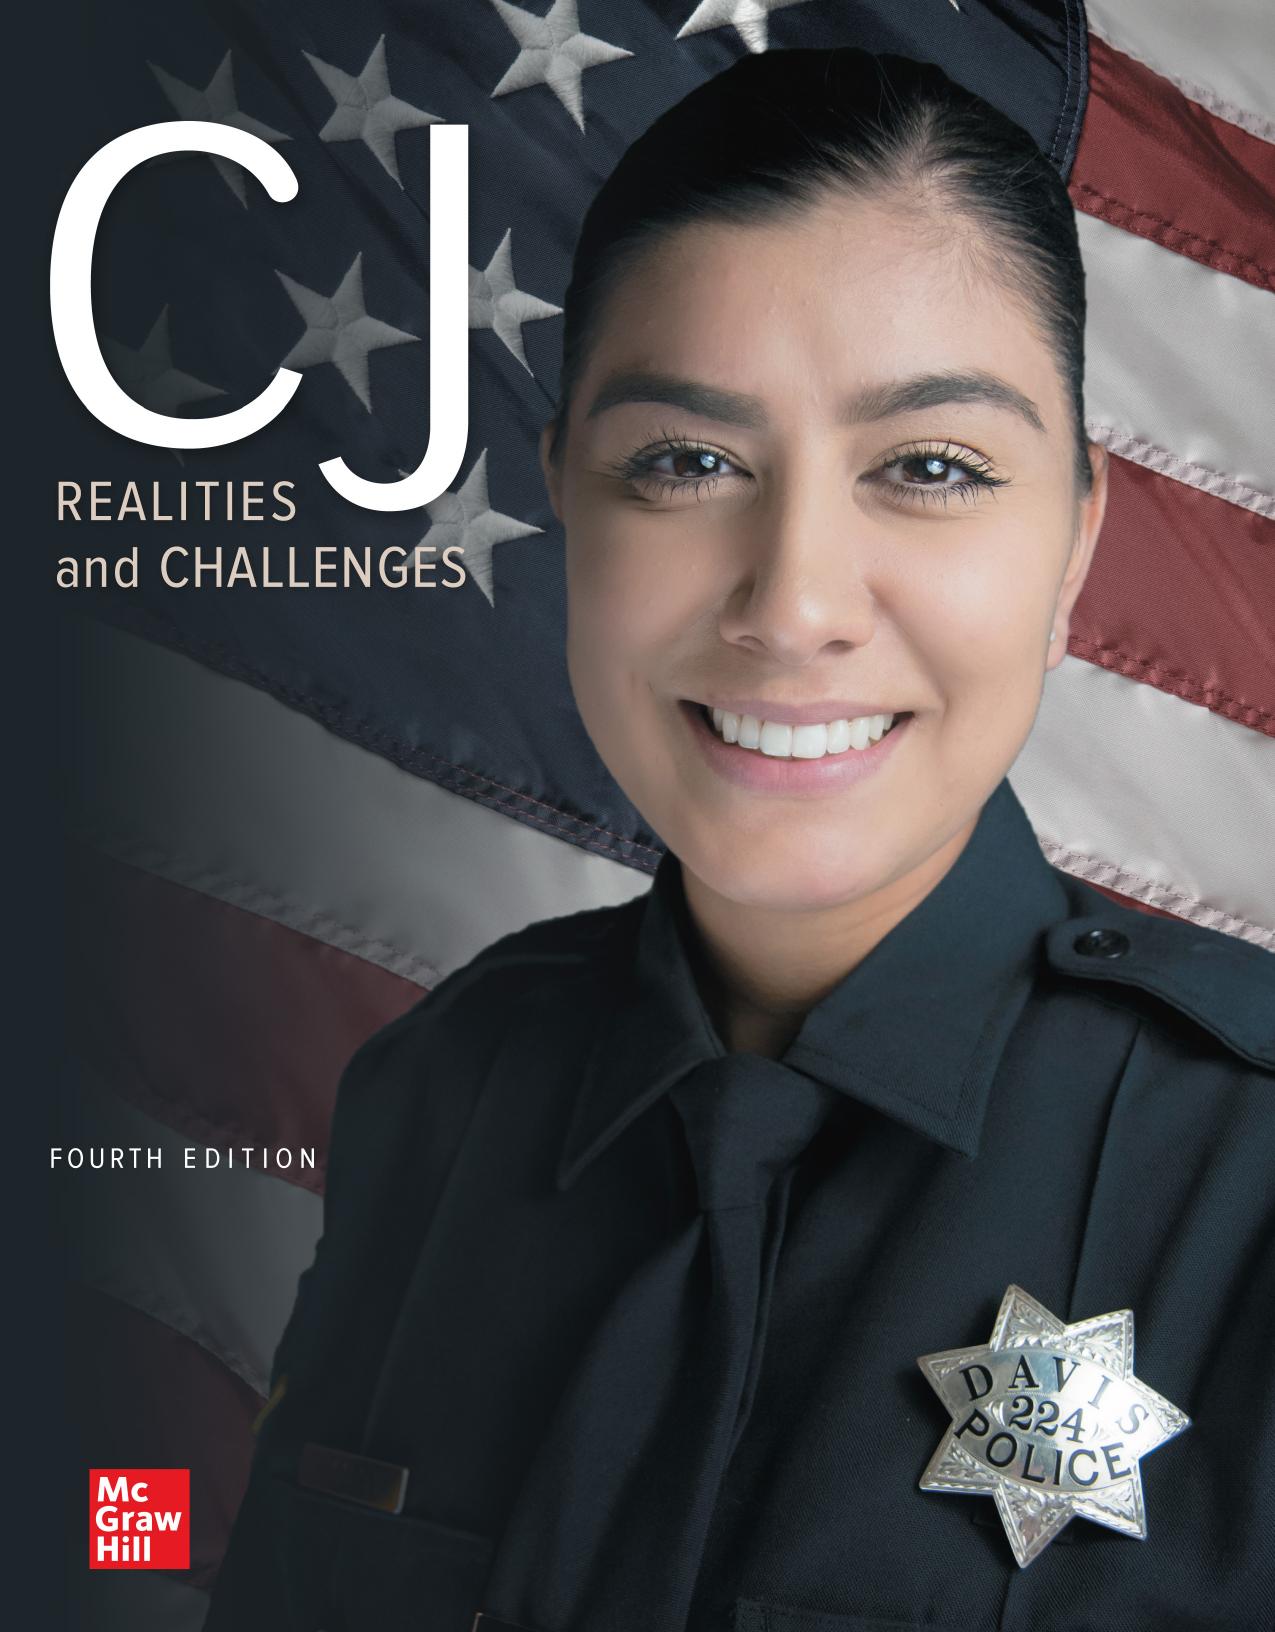 CJ REALITIES AND CHALLENGES 4th Edition  by  Ruth E. Masters , Lori Beth Way, Phyllis B. Gerstenfeld , Bernadette T. Muscat